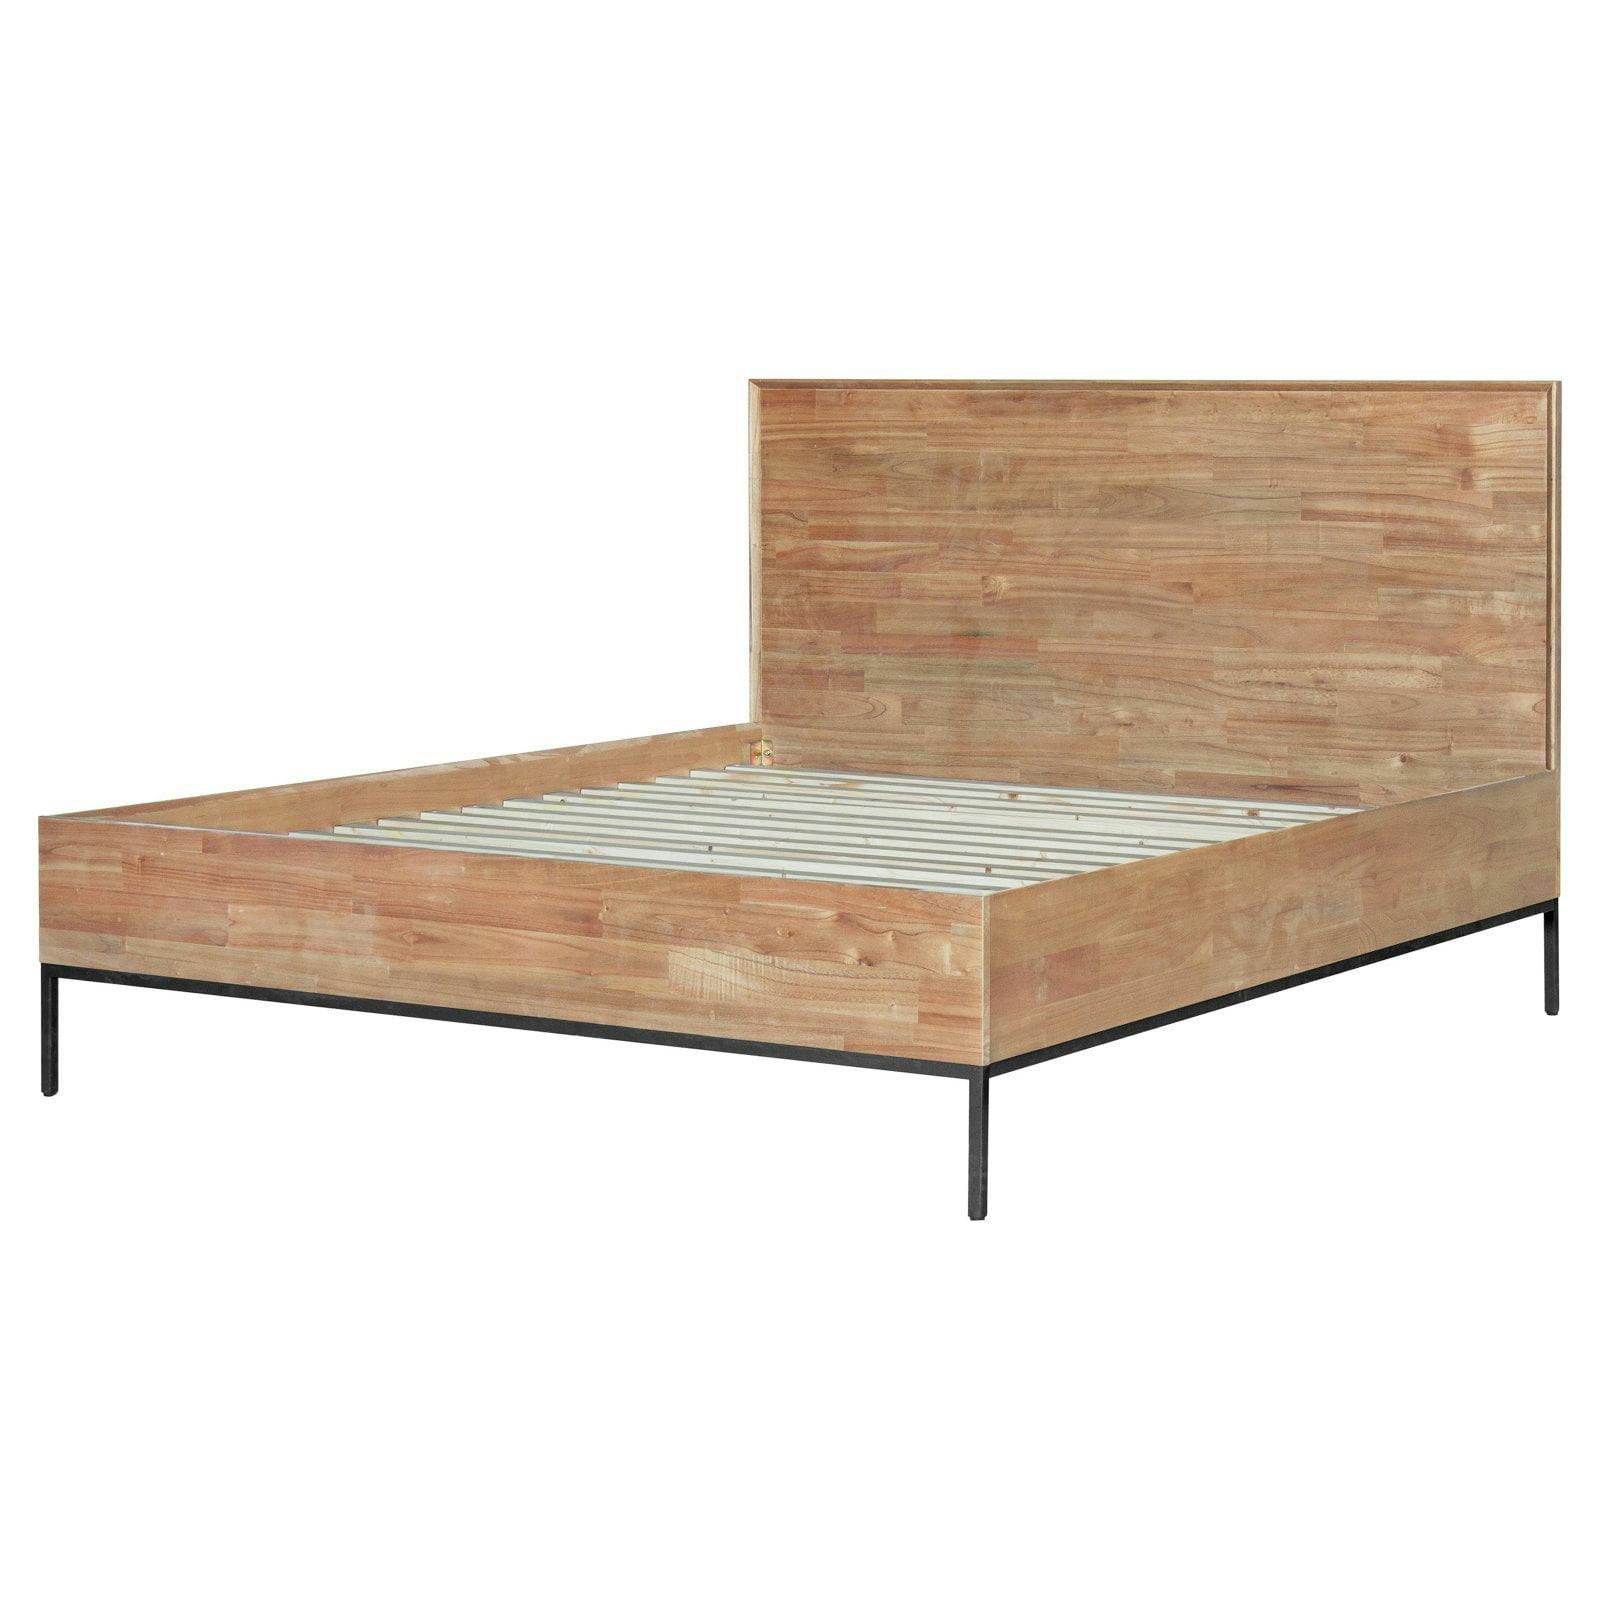 Hathaway Minimalist Queen Bed with Pine Headboard and Metal Frame